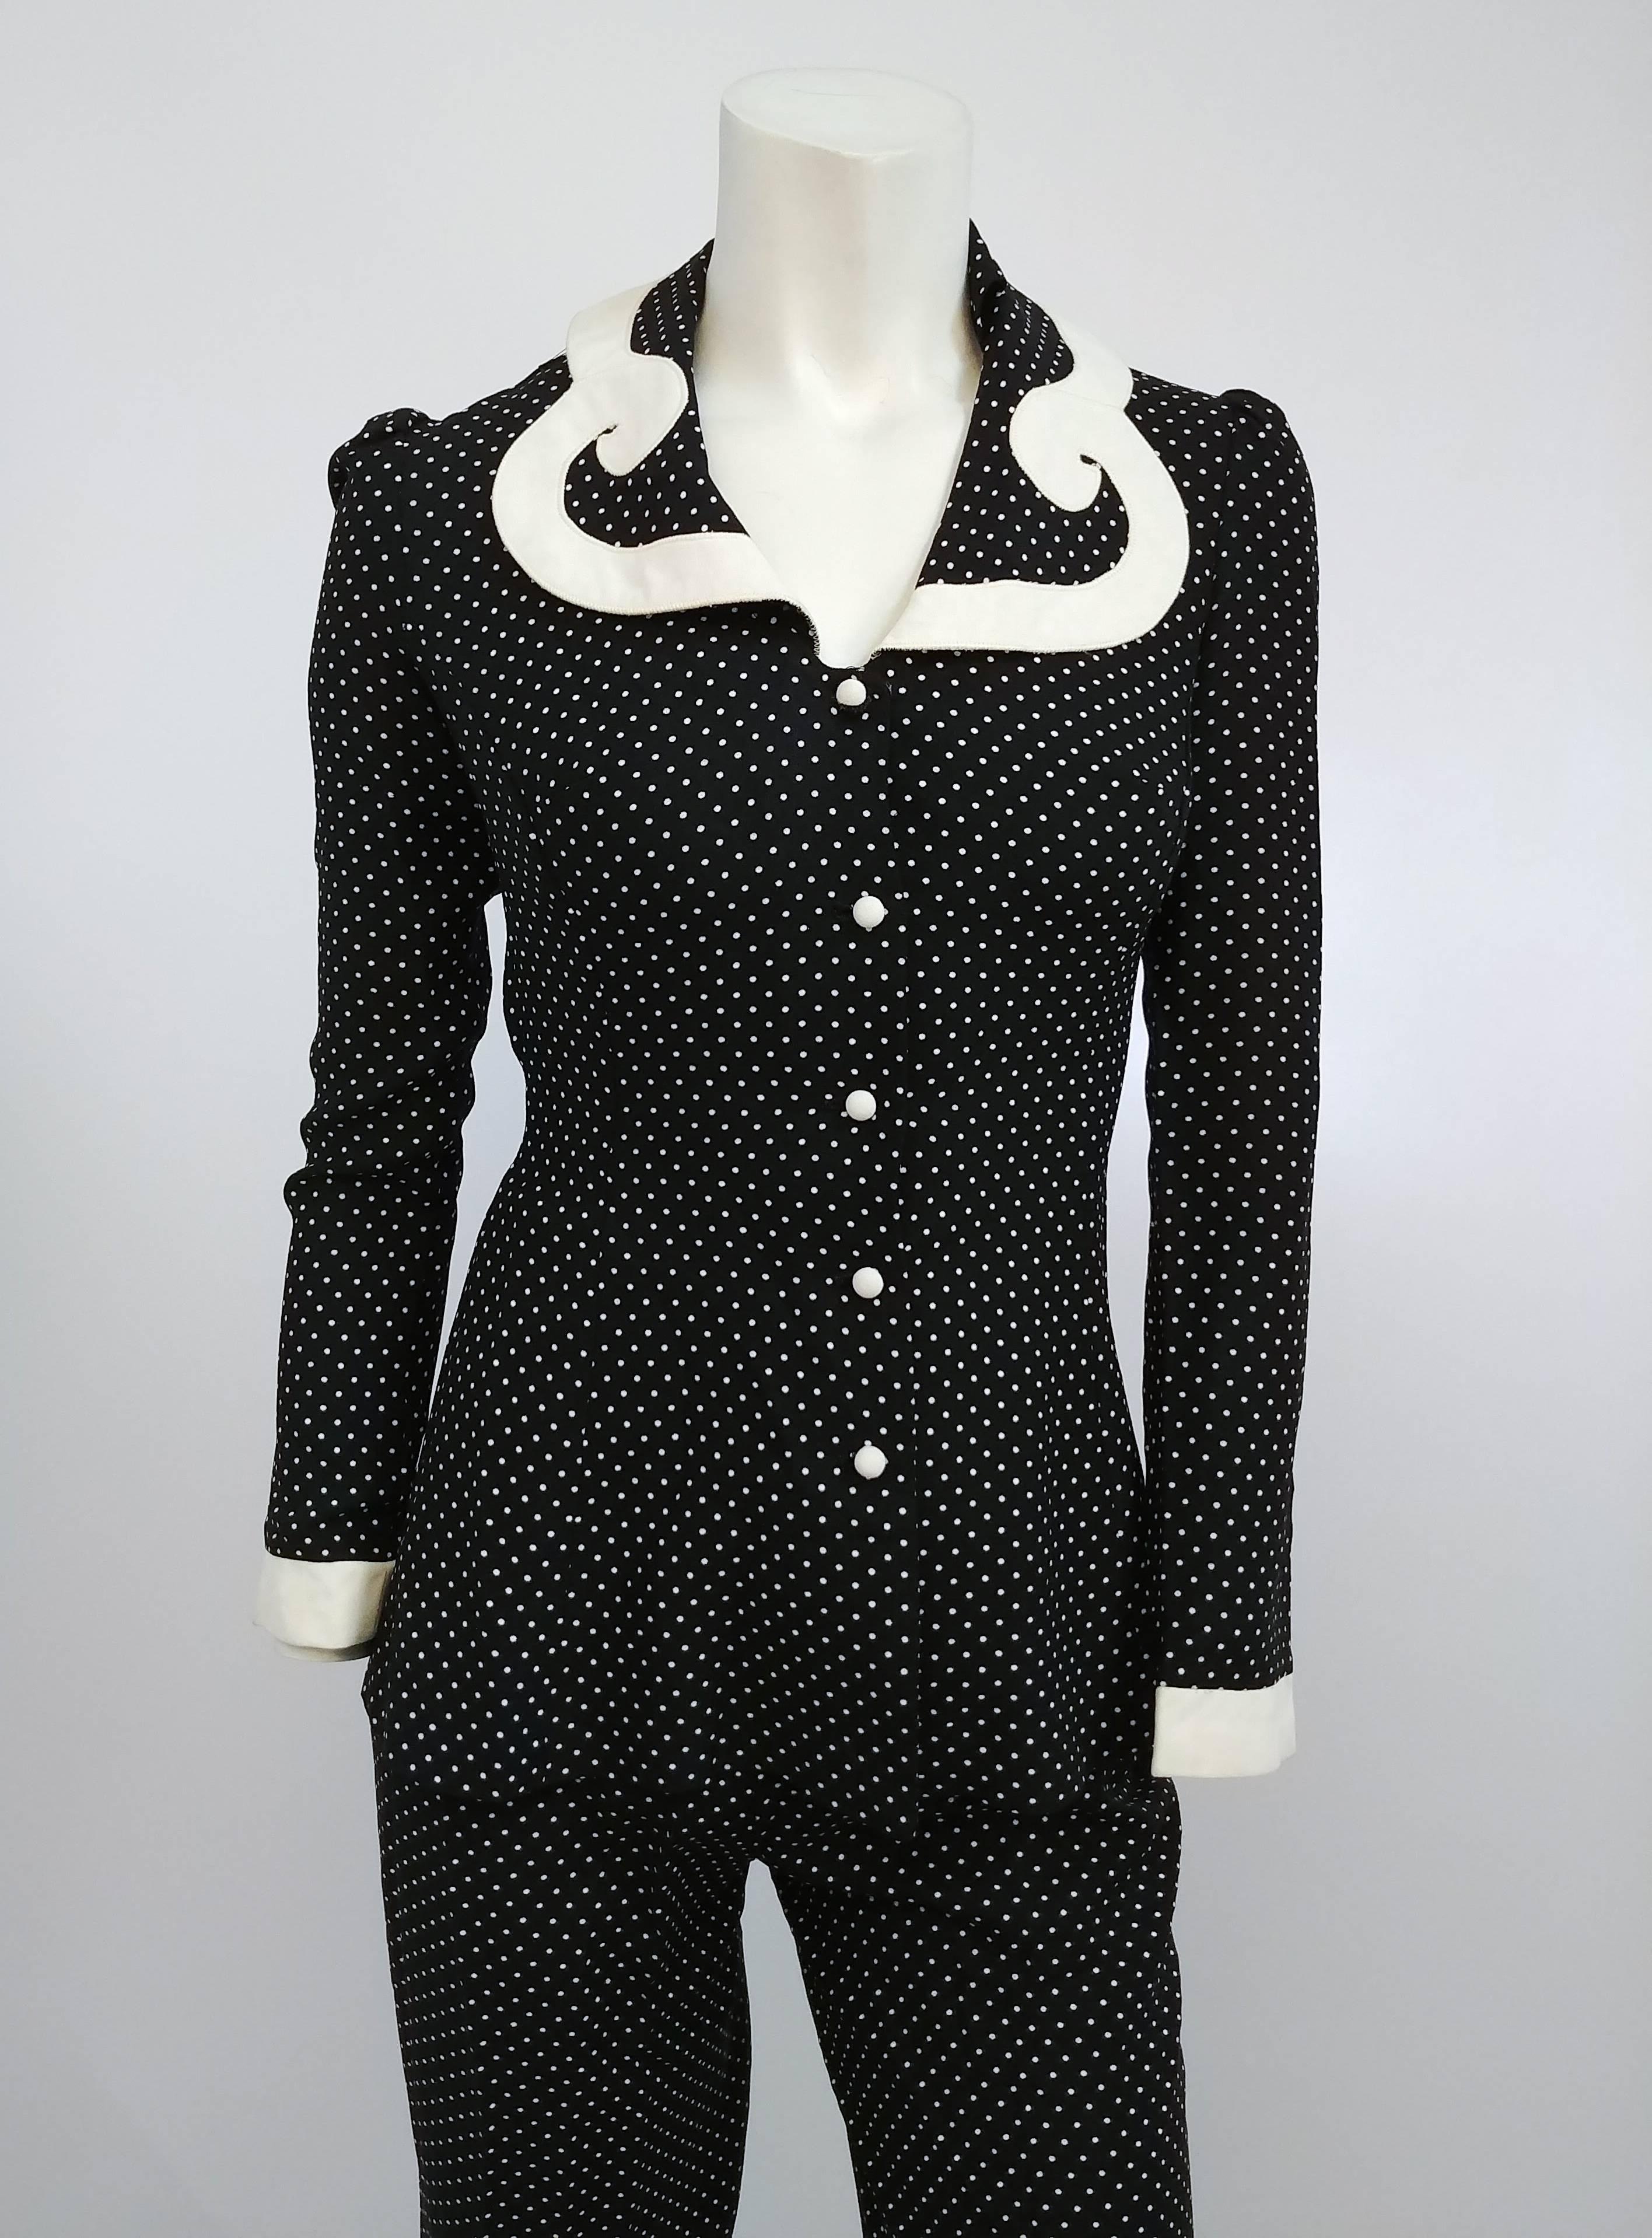 black and white pant suit